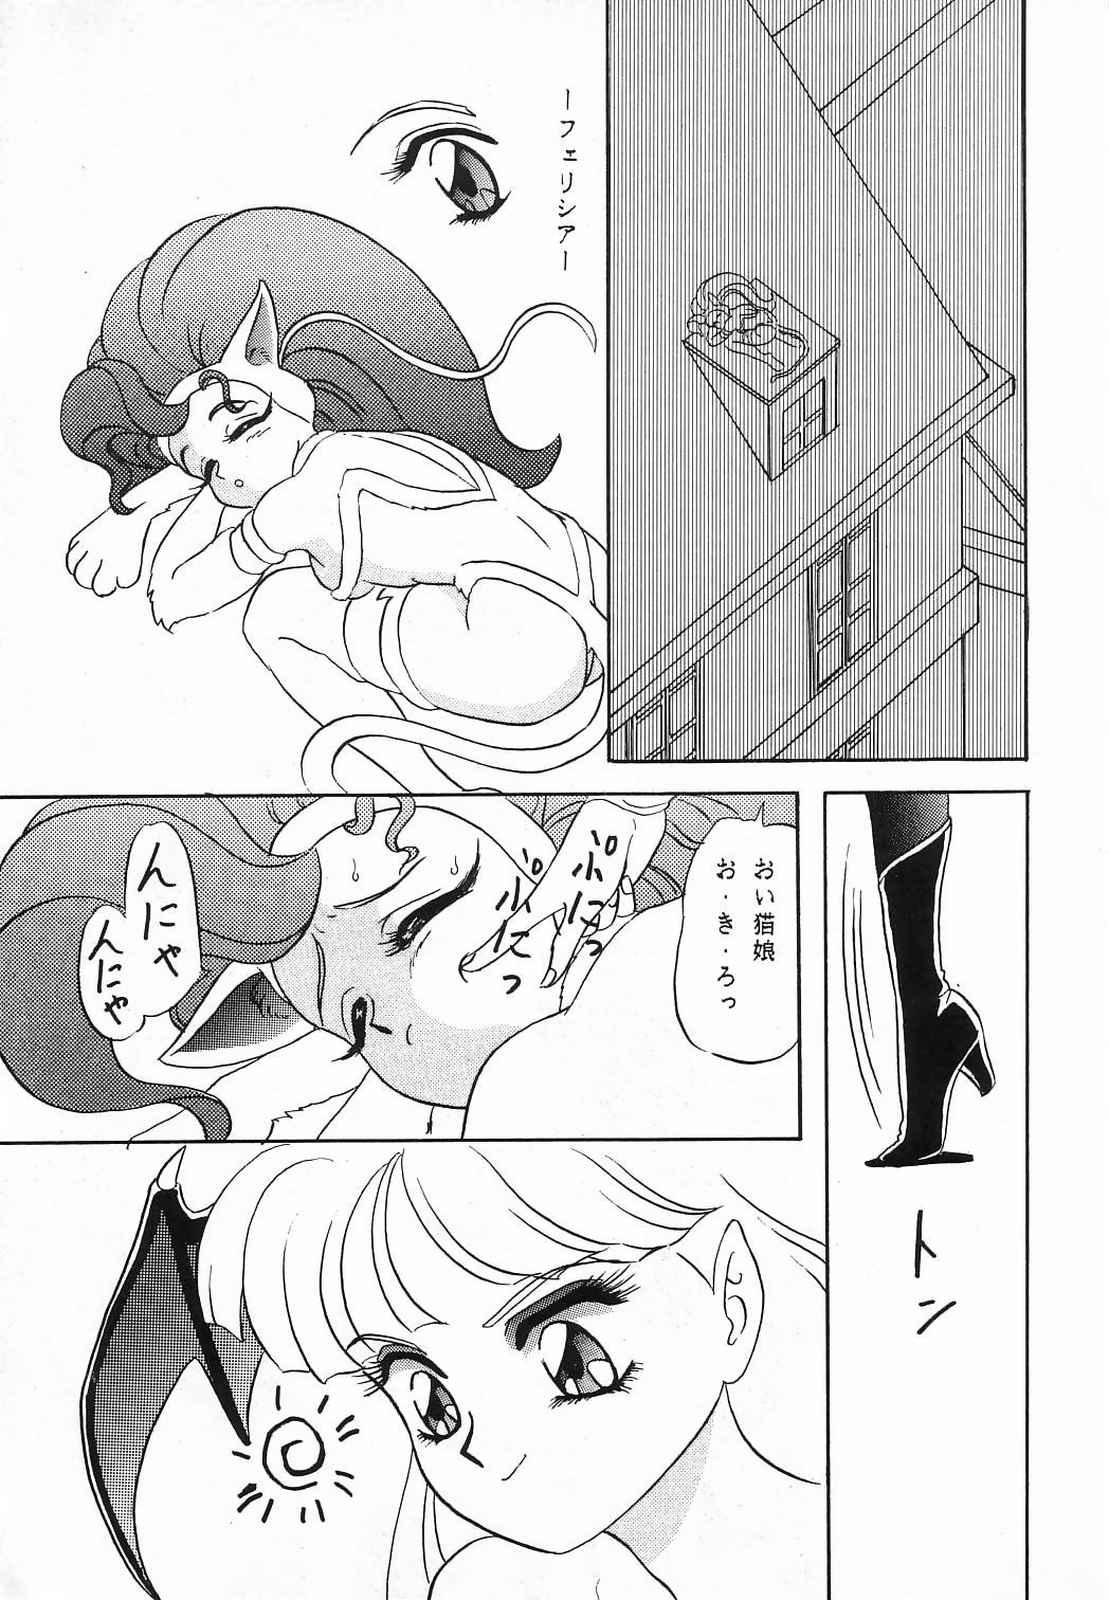 Massage Sex Lunch Box 10 - Lunch Time 2 - Sailor moon Darkstalkers Blow Job Contest - Page 7